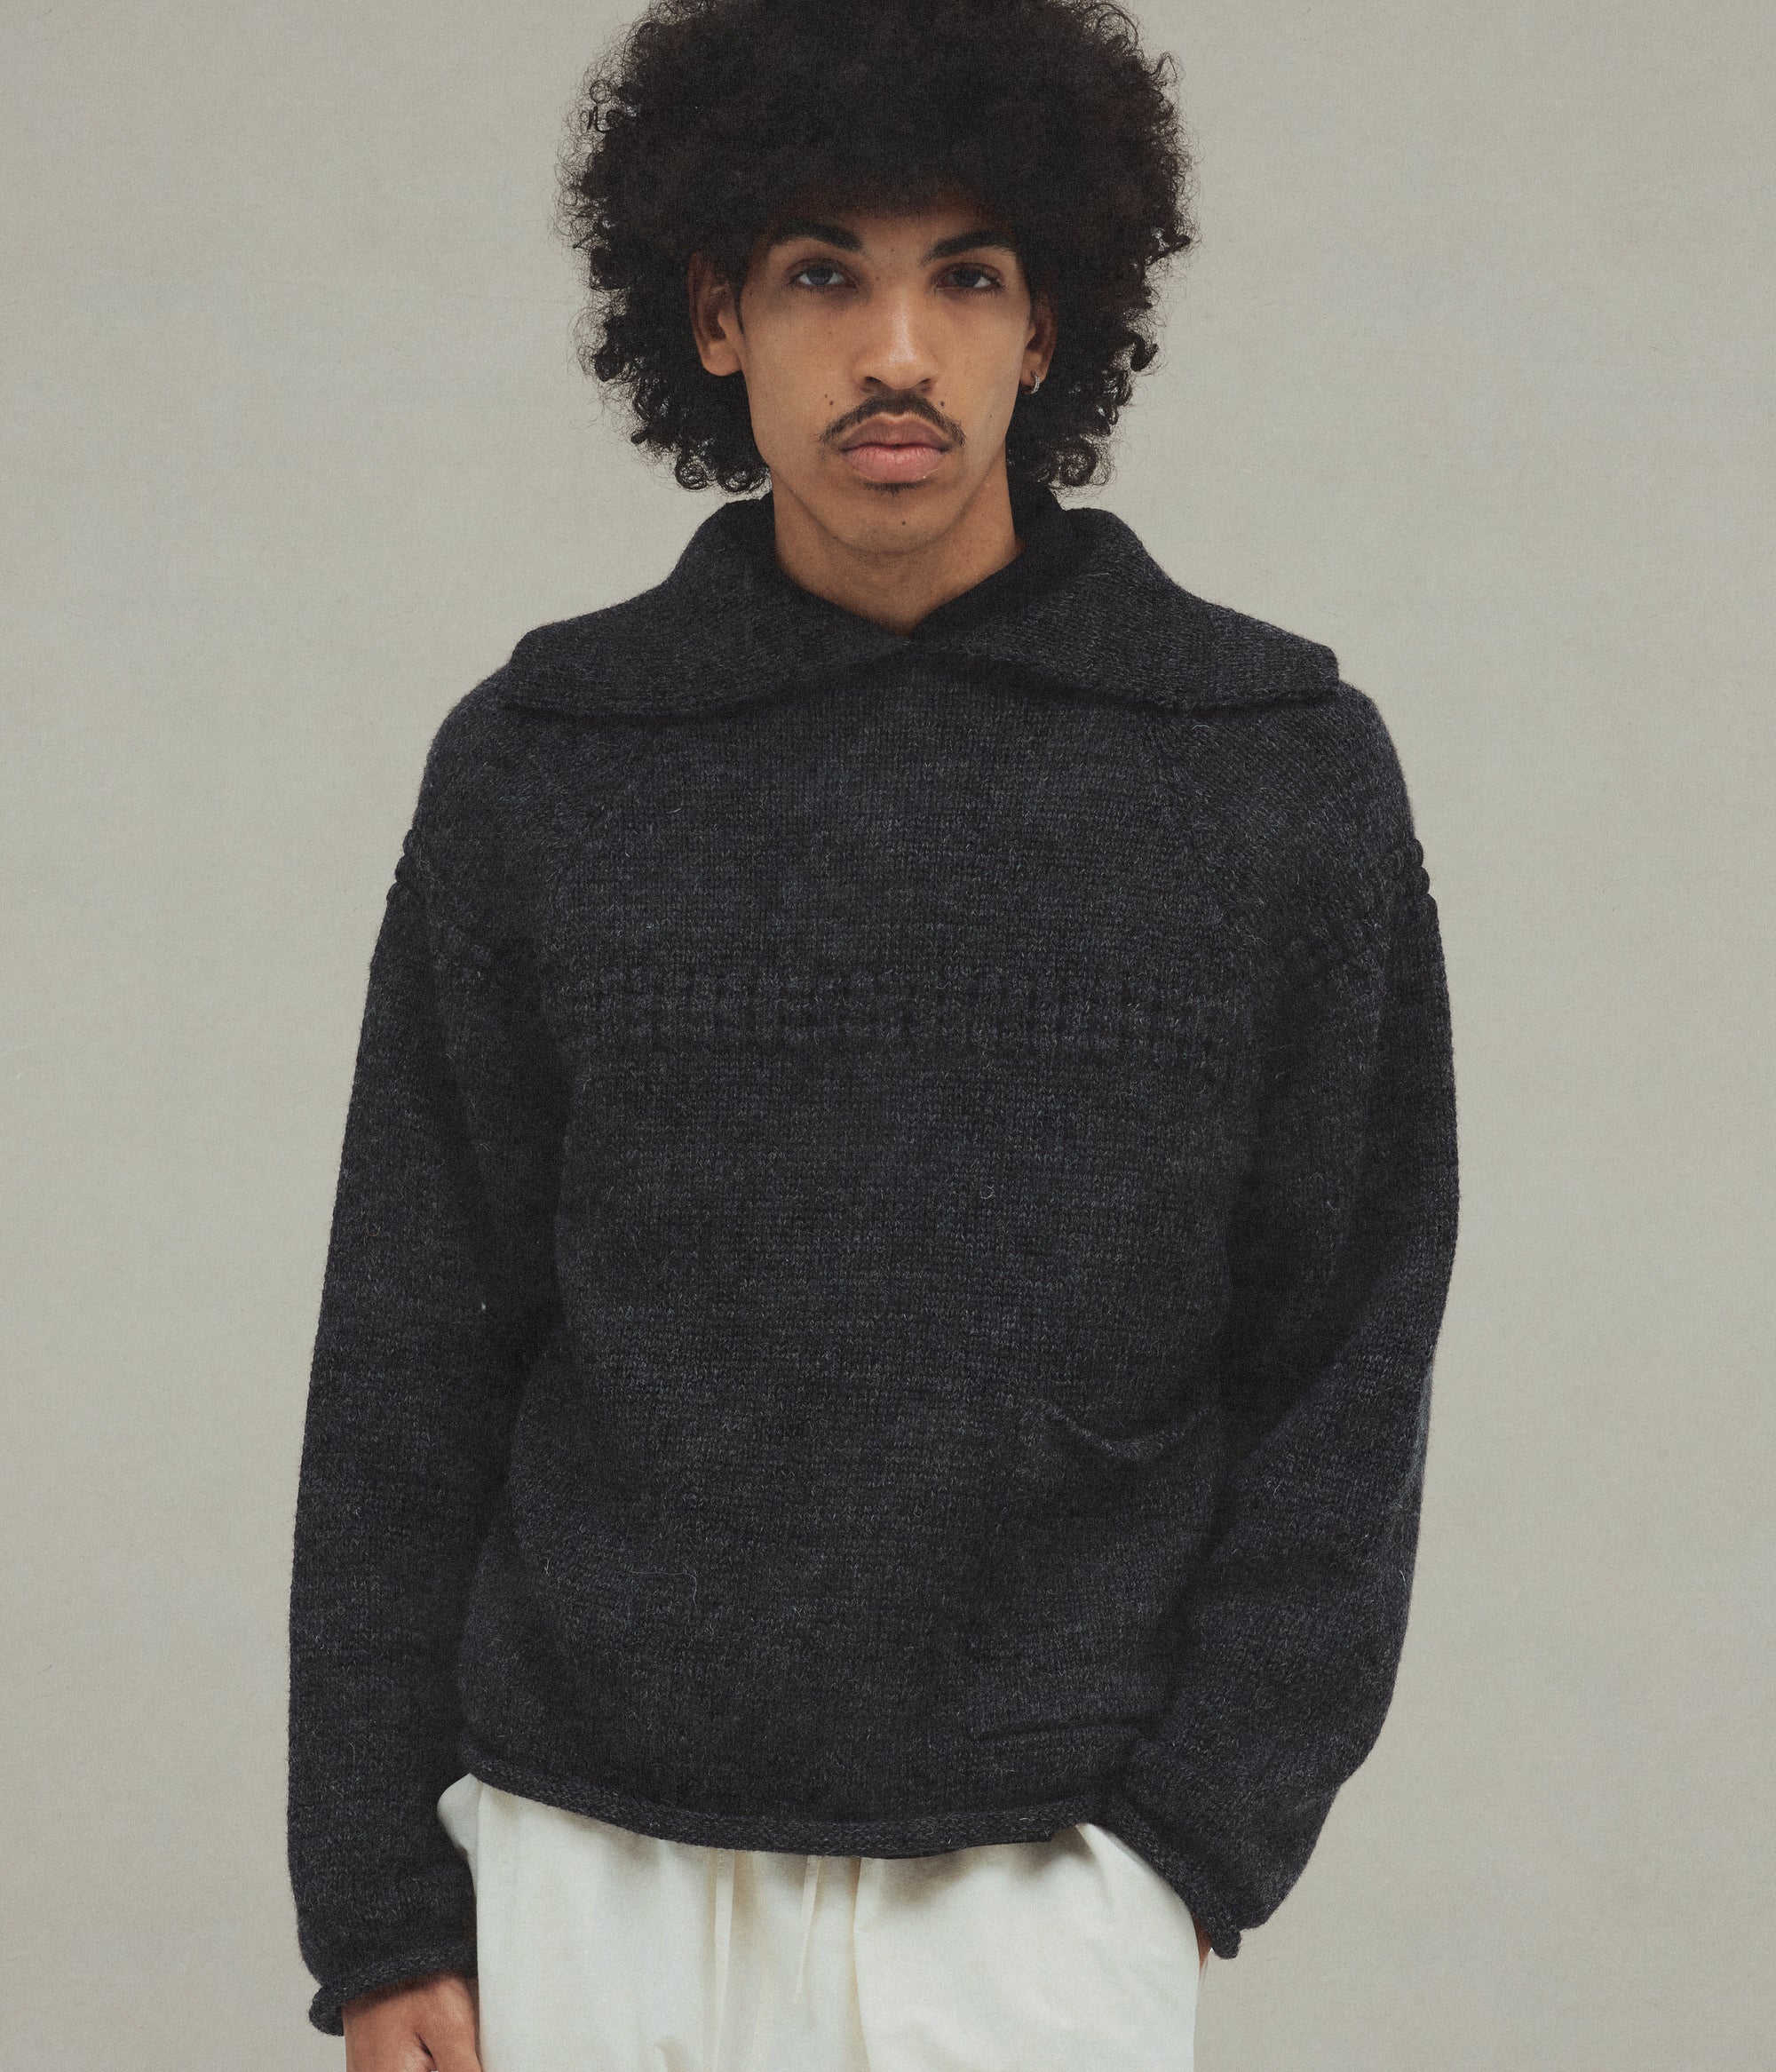 Sailor's Neck Sweater, Charcoal